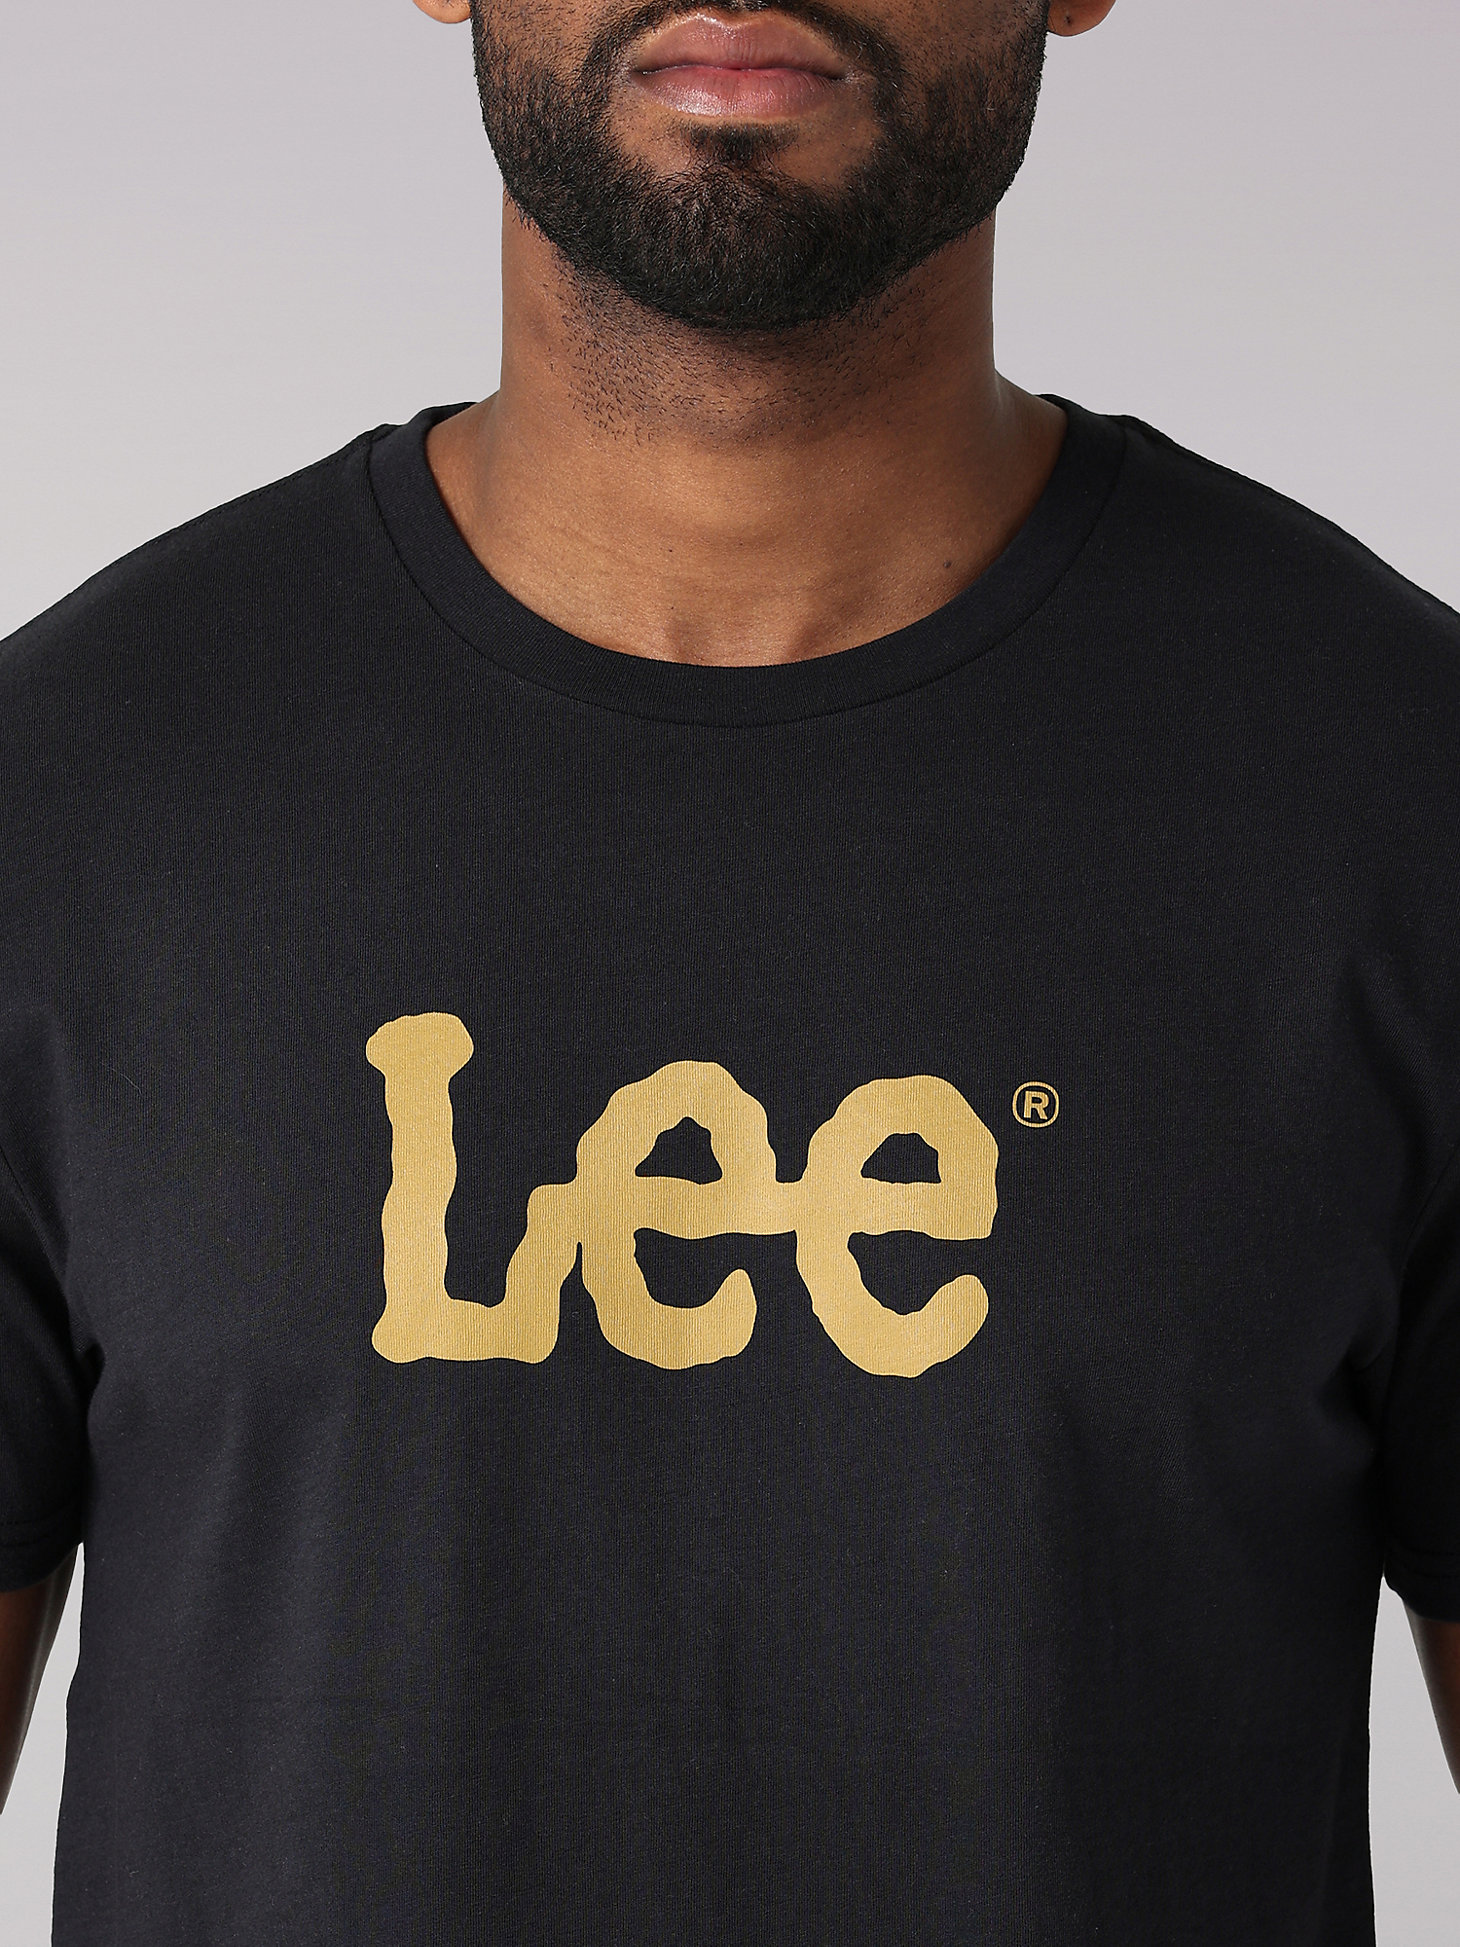 Men's Lee Solid Tee in Washed Black alternative view 2